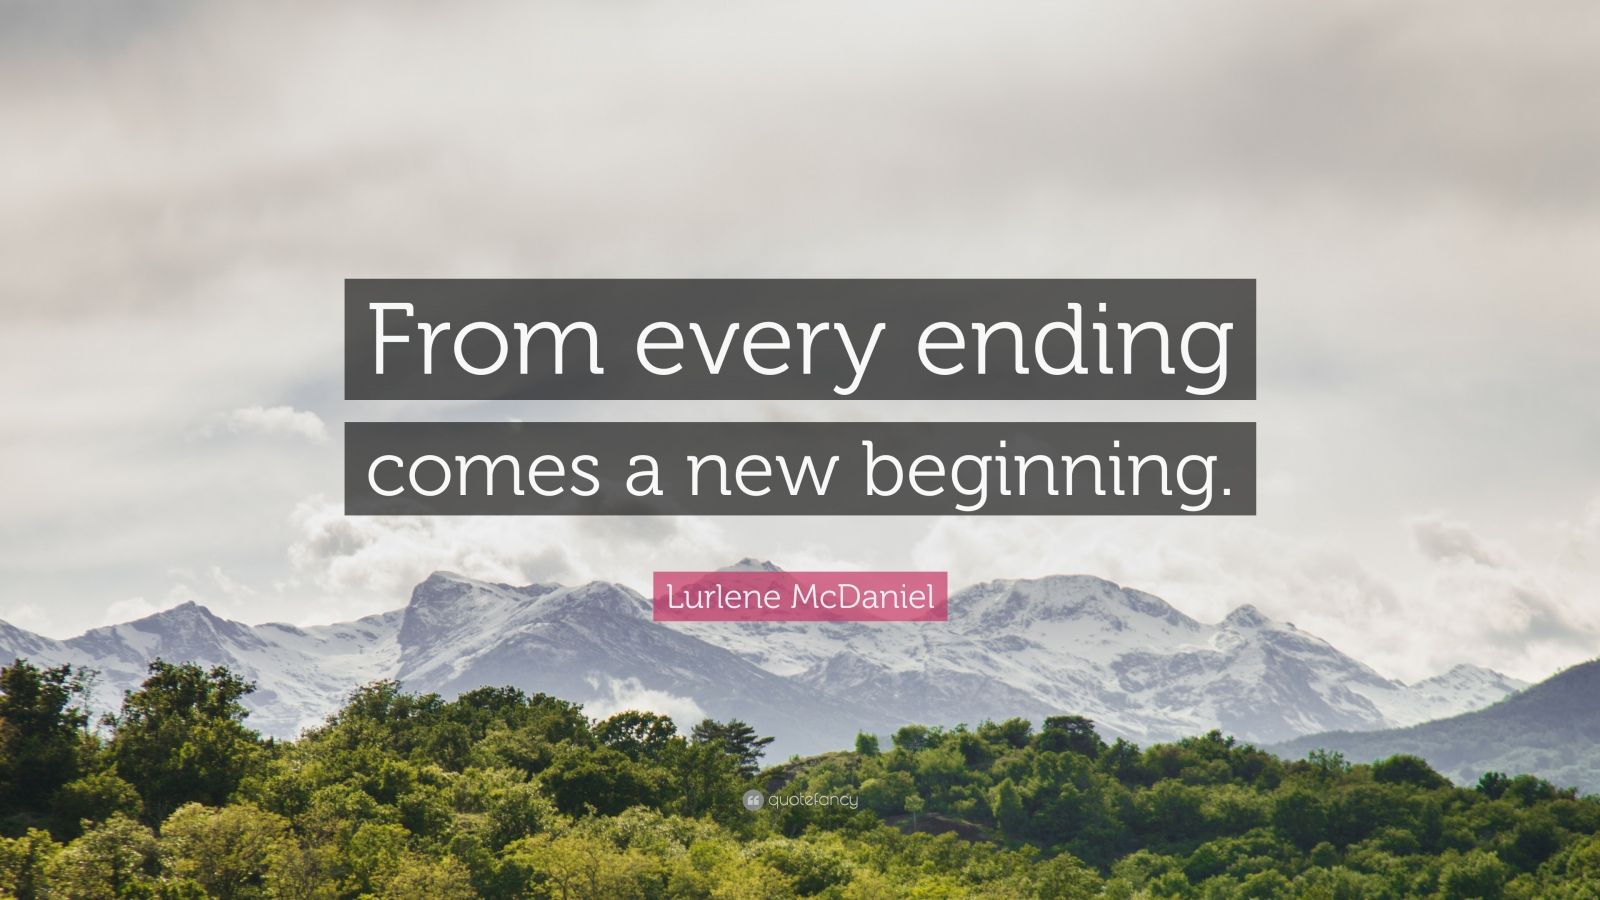 filmmaker quotes about endings and new beginnings